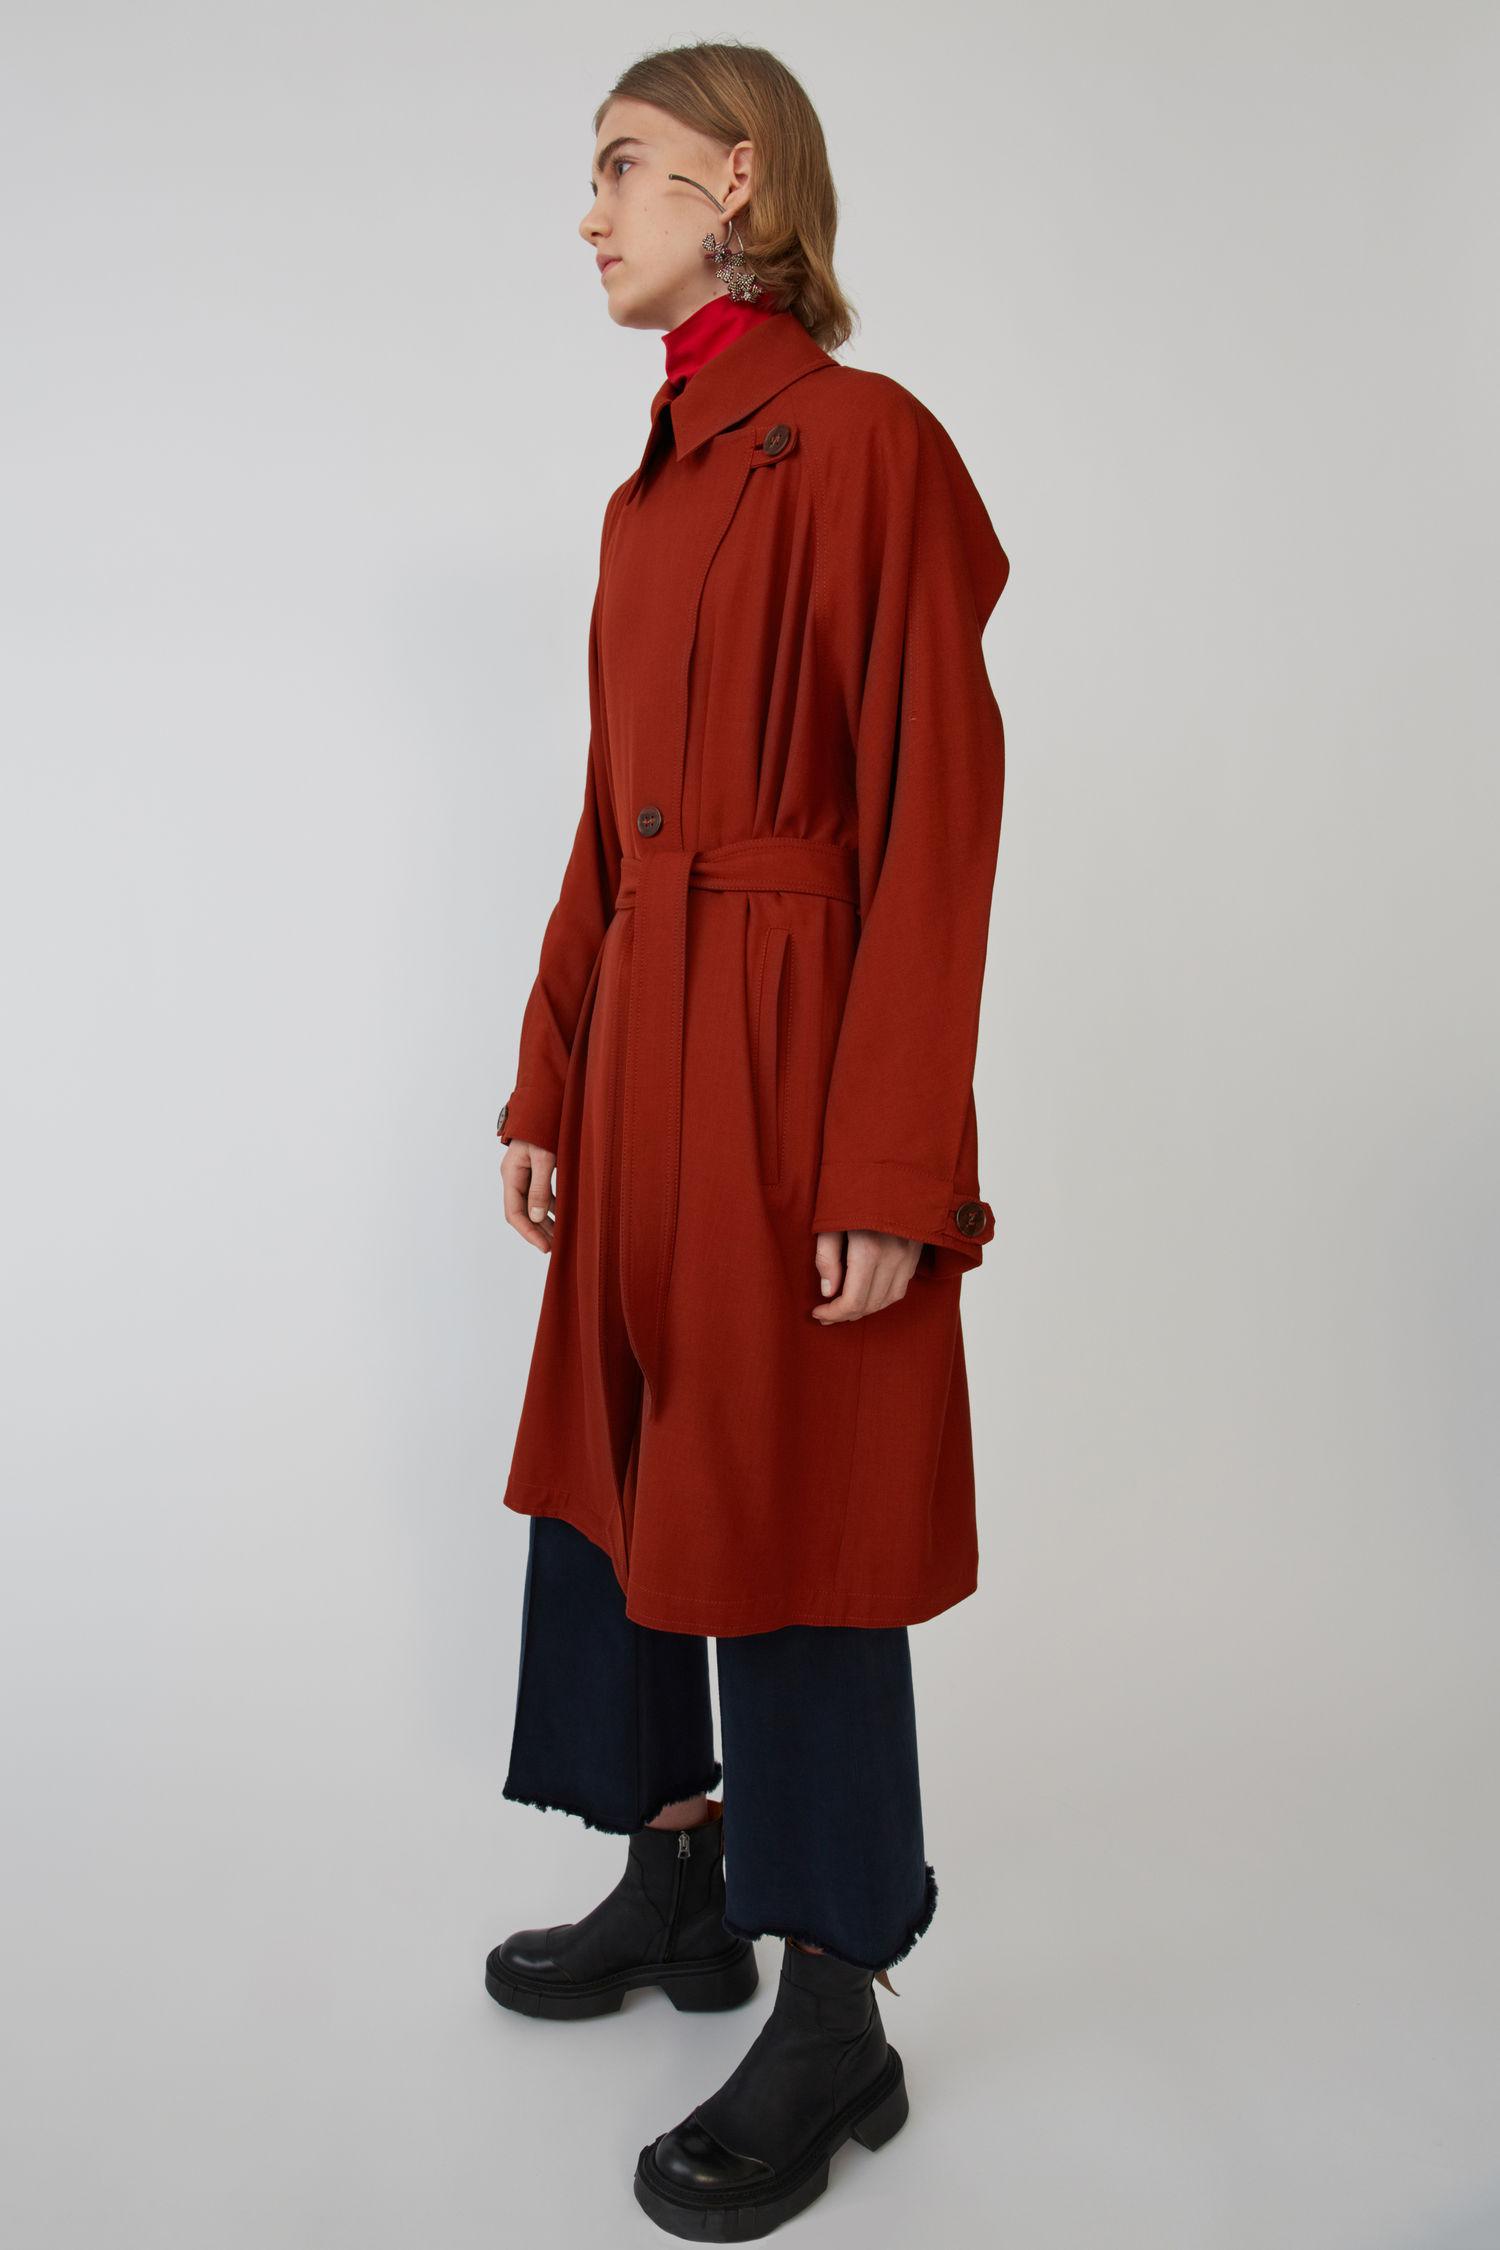 Synthetic Twill Trench Coat Rust Orange, Other Stories Belted Cotton Twill Trench Coat